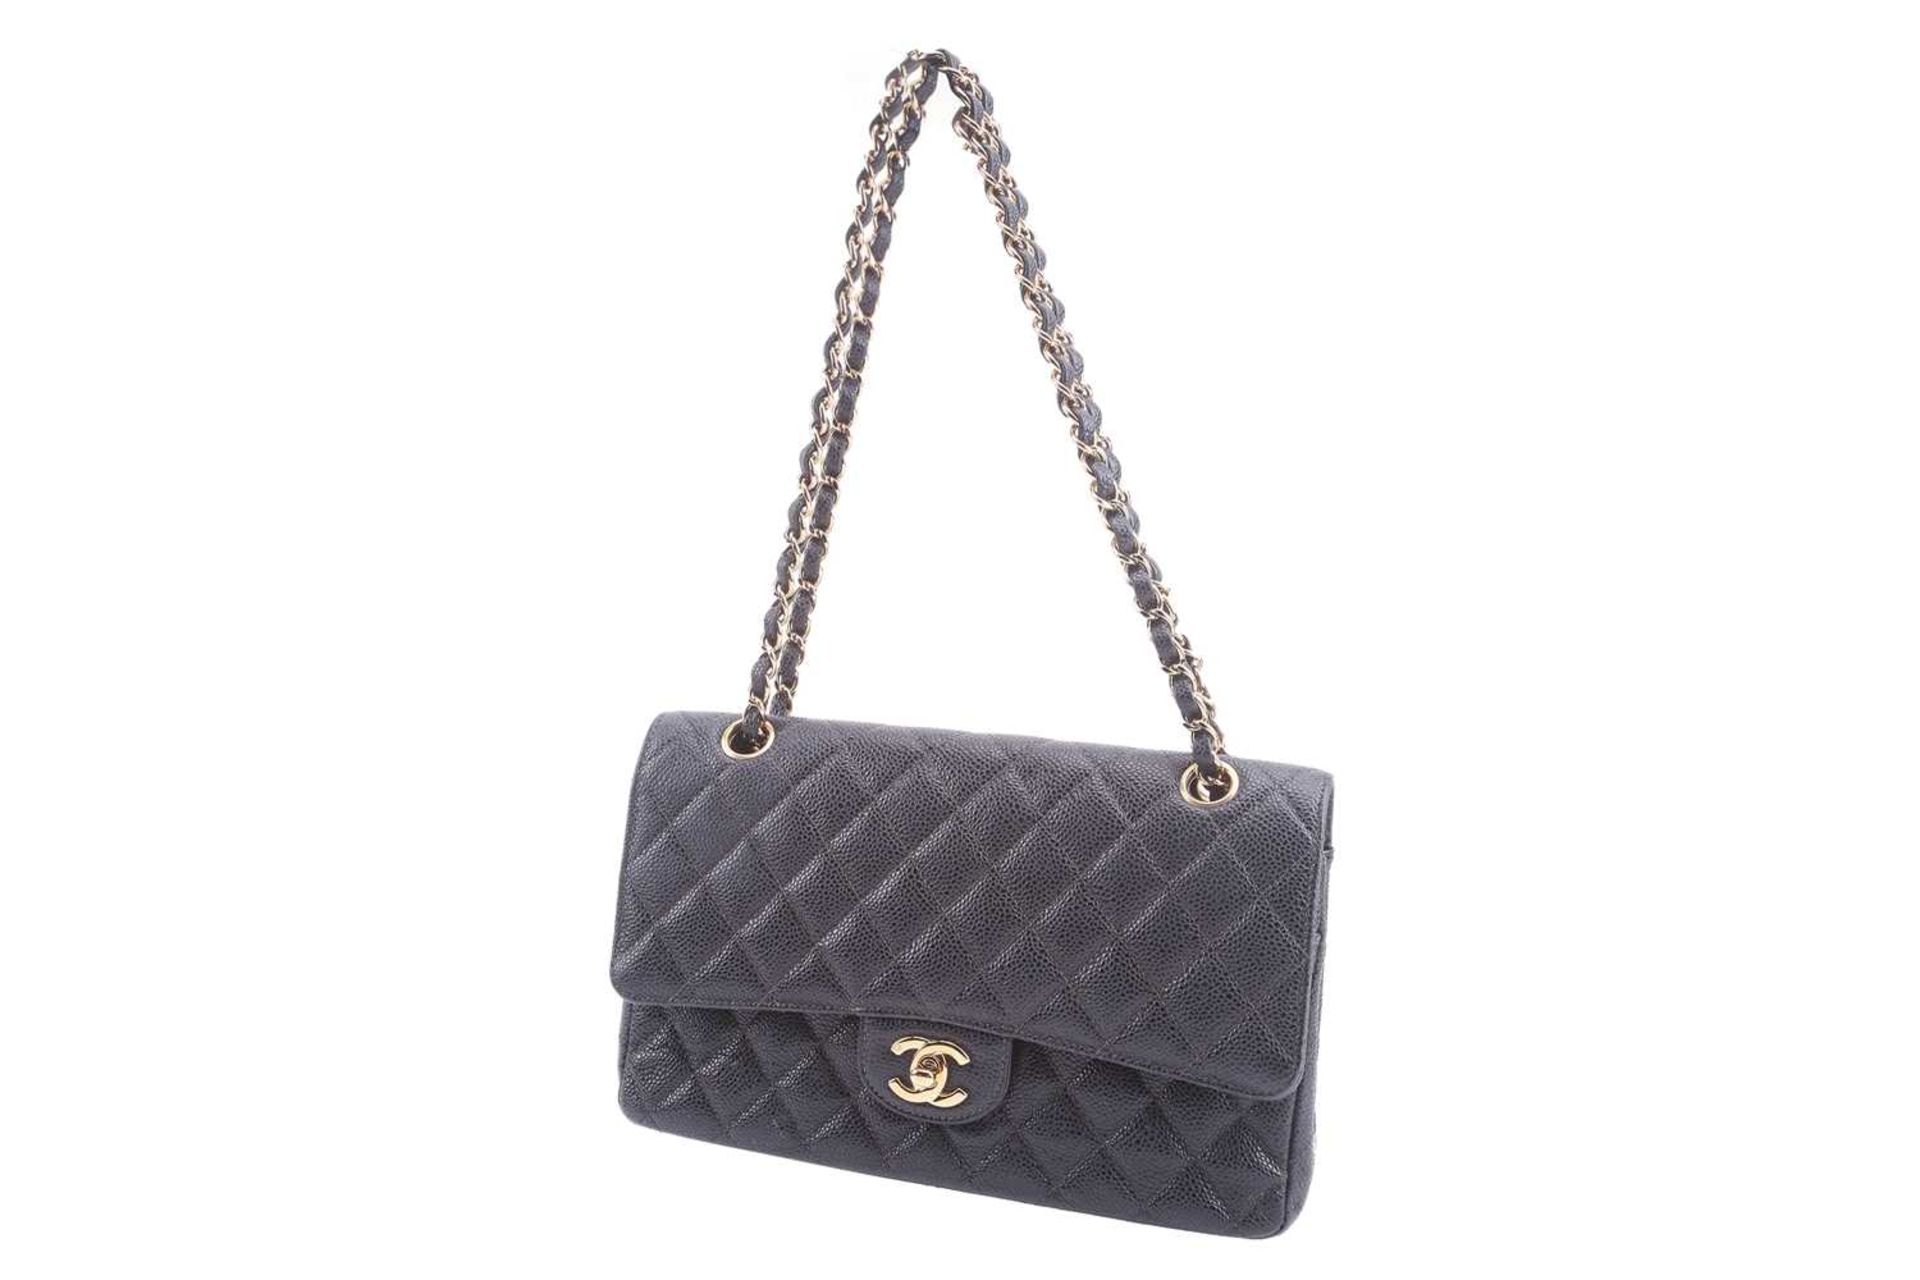 Chanel - a medium classic double flap bag in black diamond-quilted caviar leather, circa 2003, - Image 6 of 11